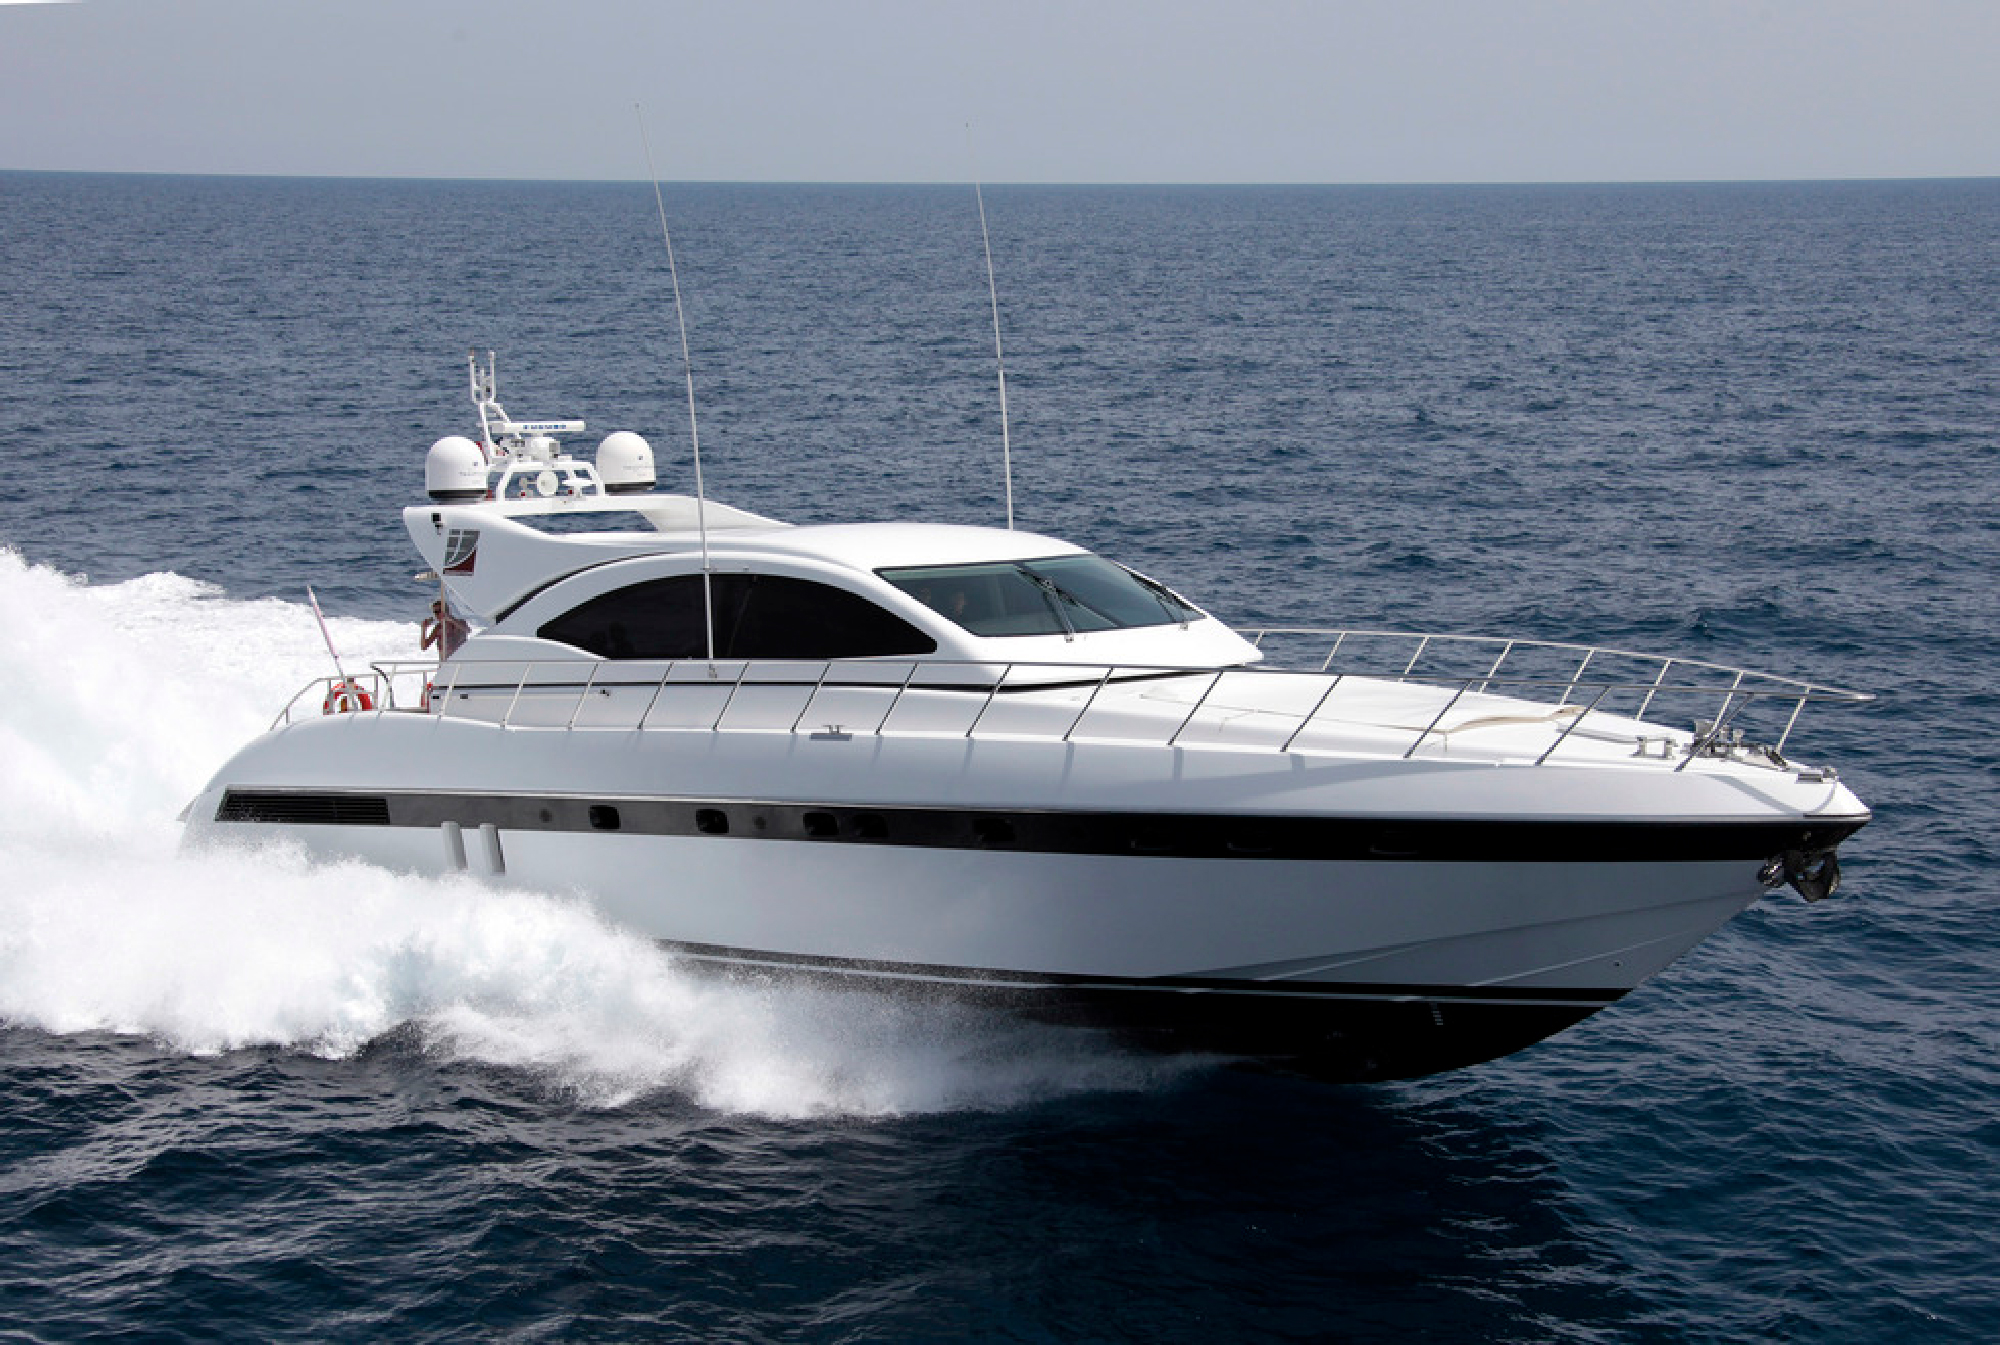 Prime Yacht Rentals Miami - Swapping land for sailing adventures onboard the 75’ Mangusta